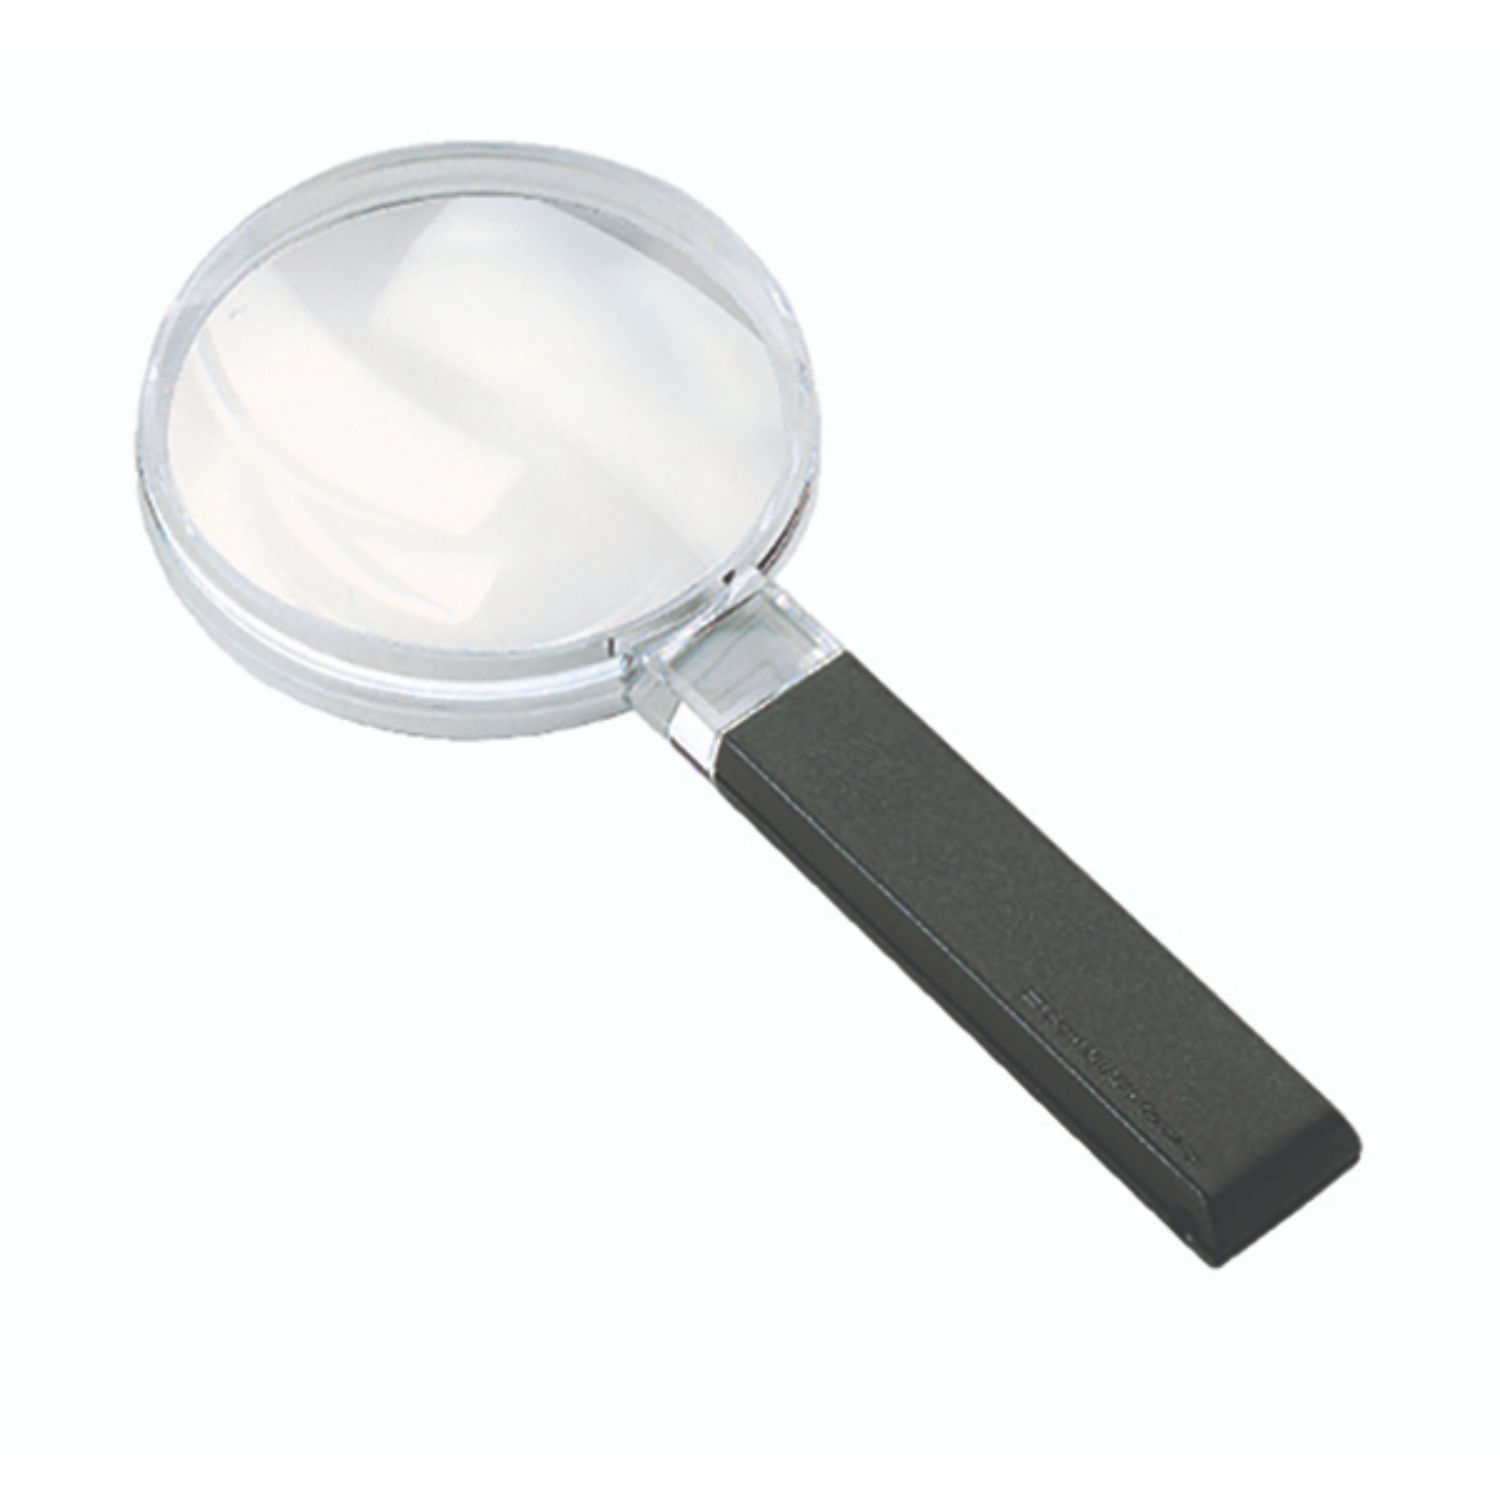 Large Magnifying Glass